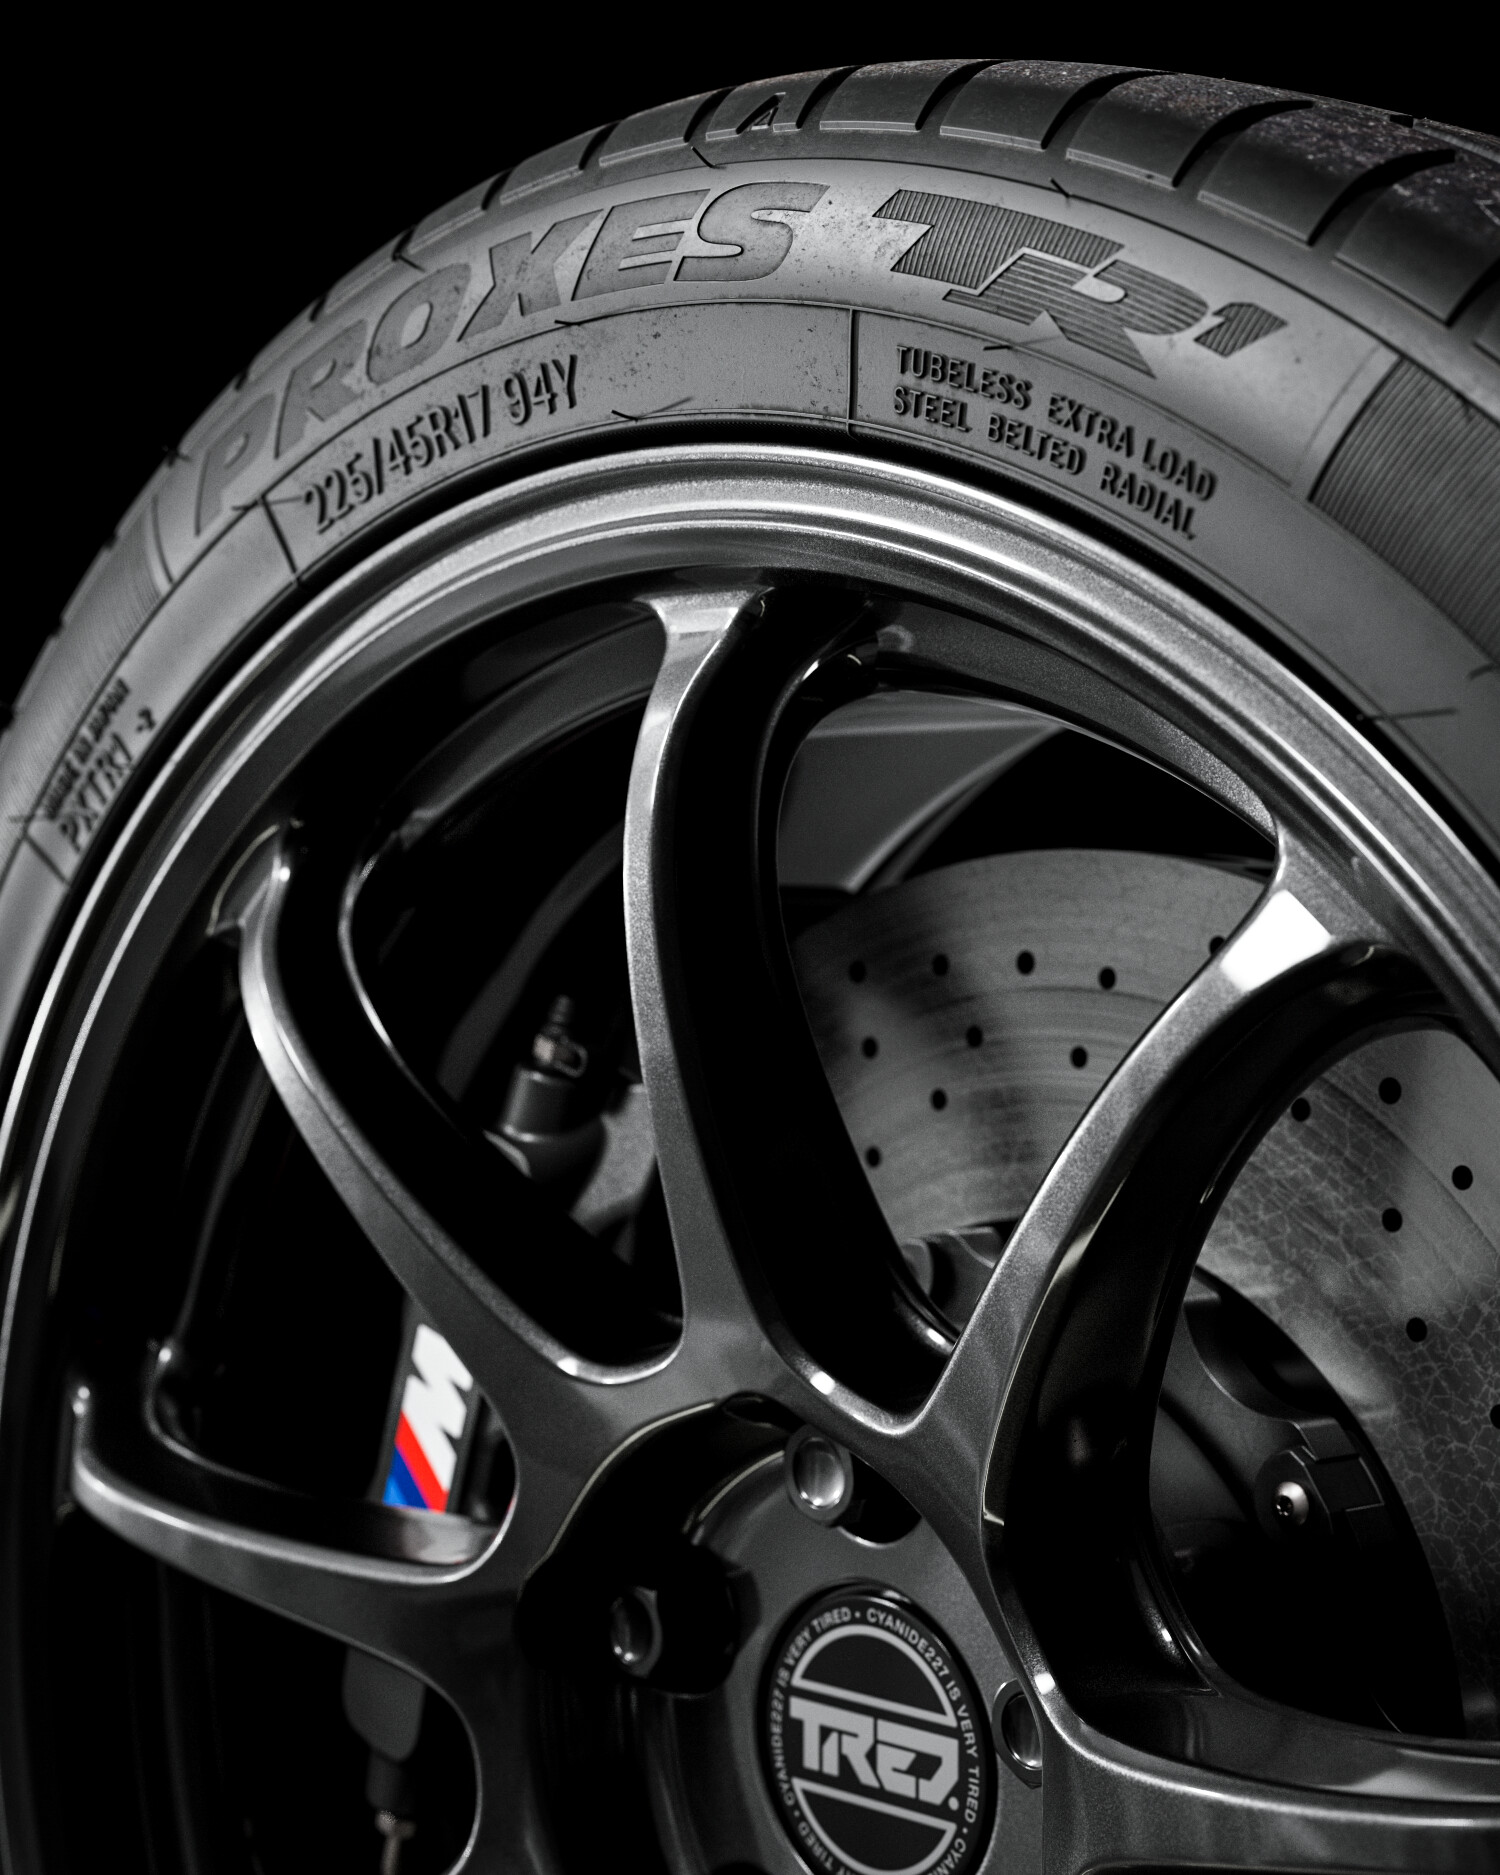 TOYO® PROXES® TR1™ • 225/45 R17 (94Y) XL • (Real World Details)